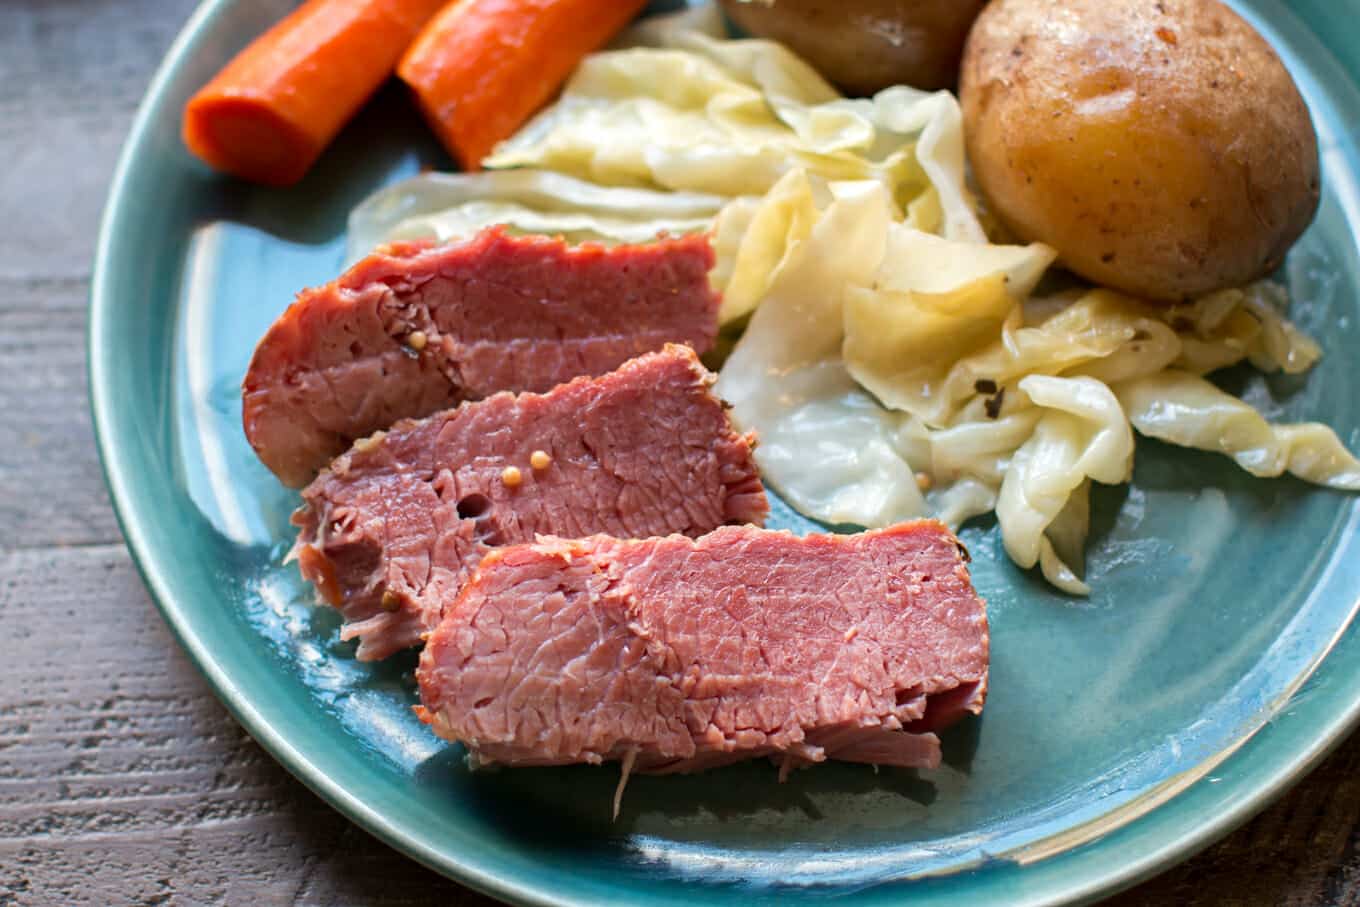 sliced cooked corned beef on a teal plate.